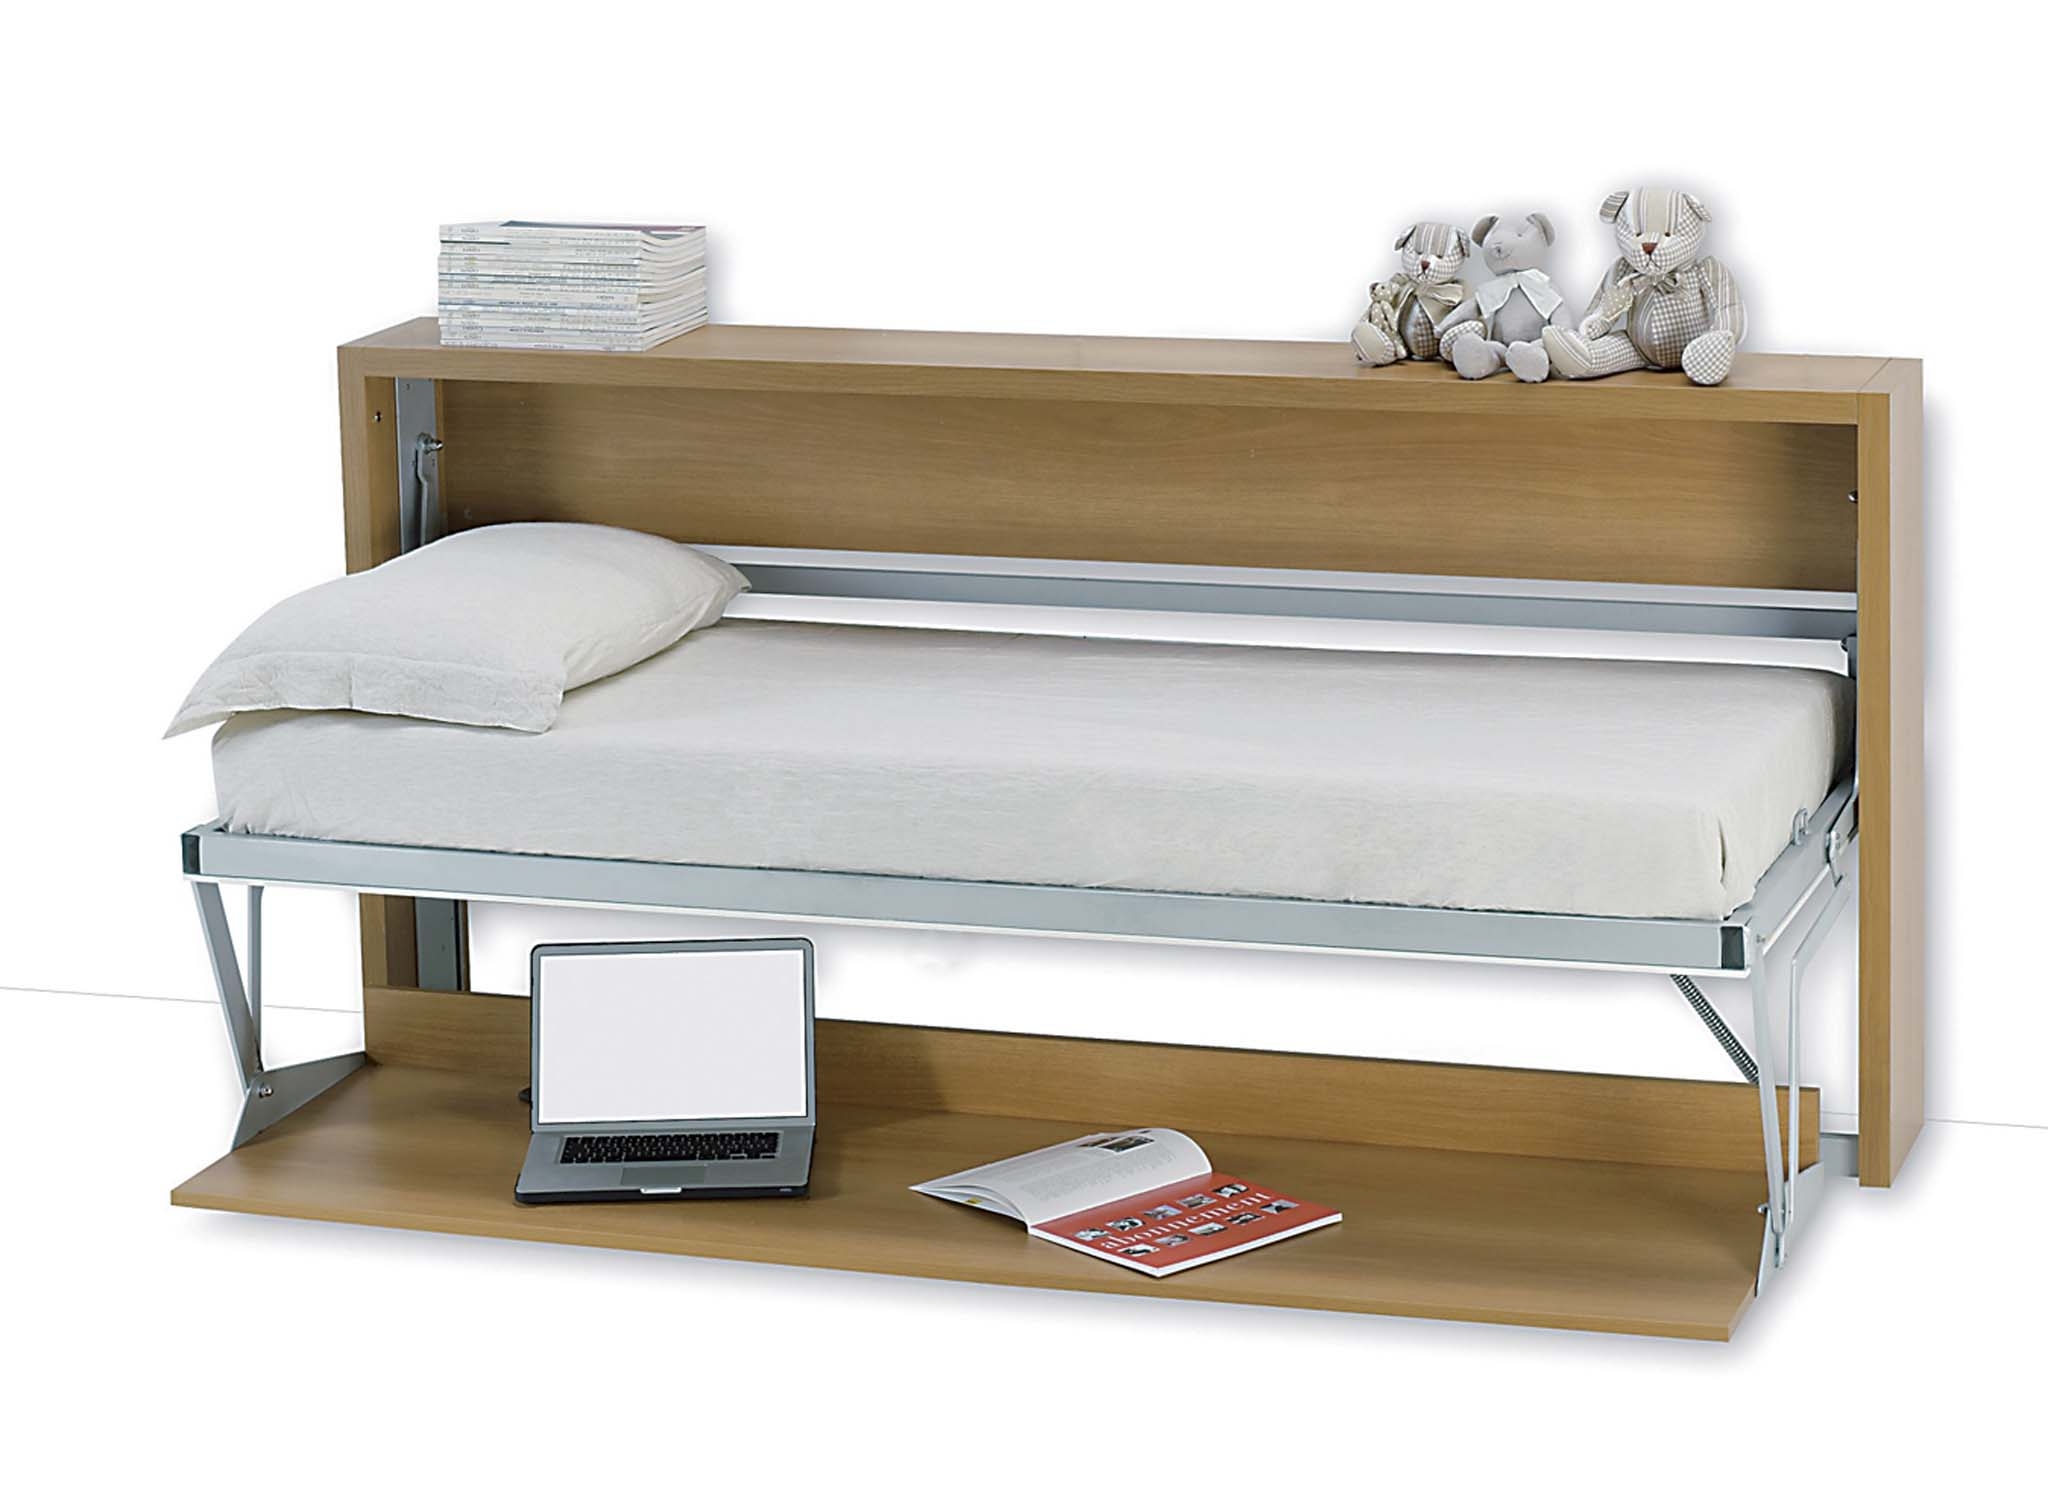 Space Saving Beds Visualhunt, Space Saving Corner Twin Beds